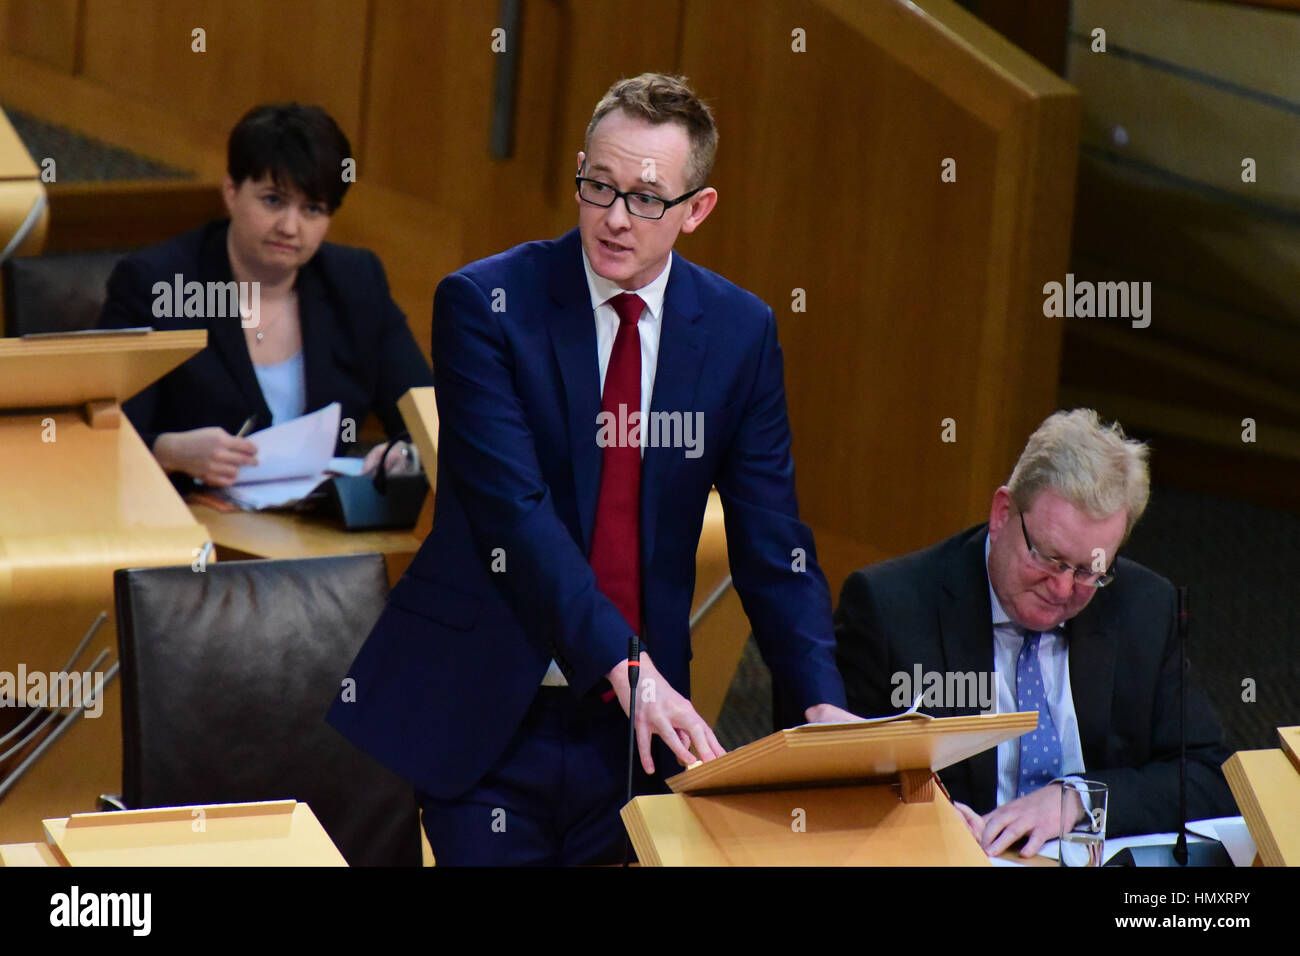 Edinburgh, UK. 7th Feb, 2017. Scottish Conservative spokesman John Lamont speaking in the Scottish Parliament during the debate on the triggering of Article 50 in the Brexit process, with leader Ruth Davidson and deputy leader Jackson Carlaw in the background, Credit: Ken Jack/Alamy Live News Stock Photo